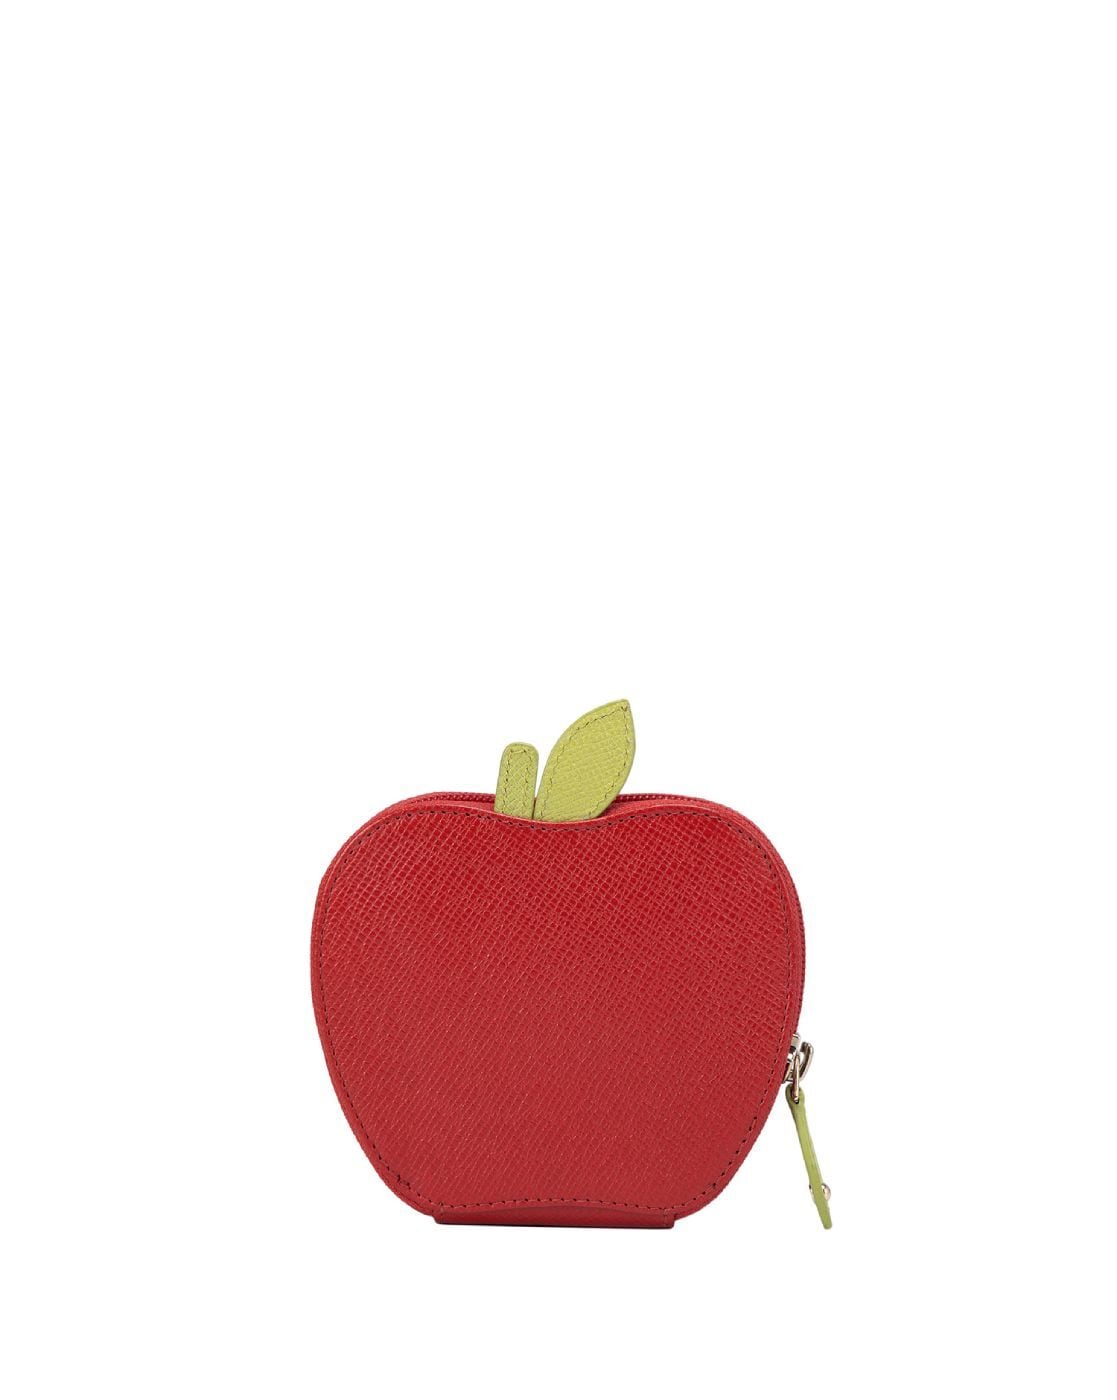 Womens Judith Leiber red The Big Apple Clutch Bag | Harrods # {CountryCode}